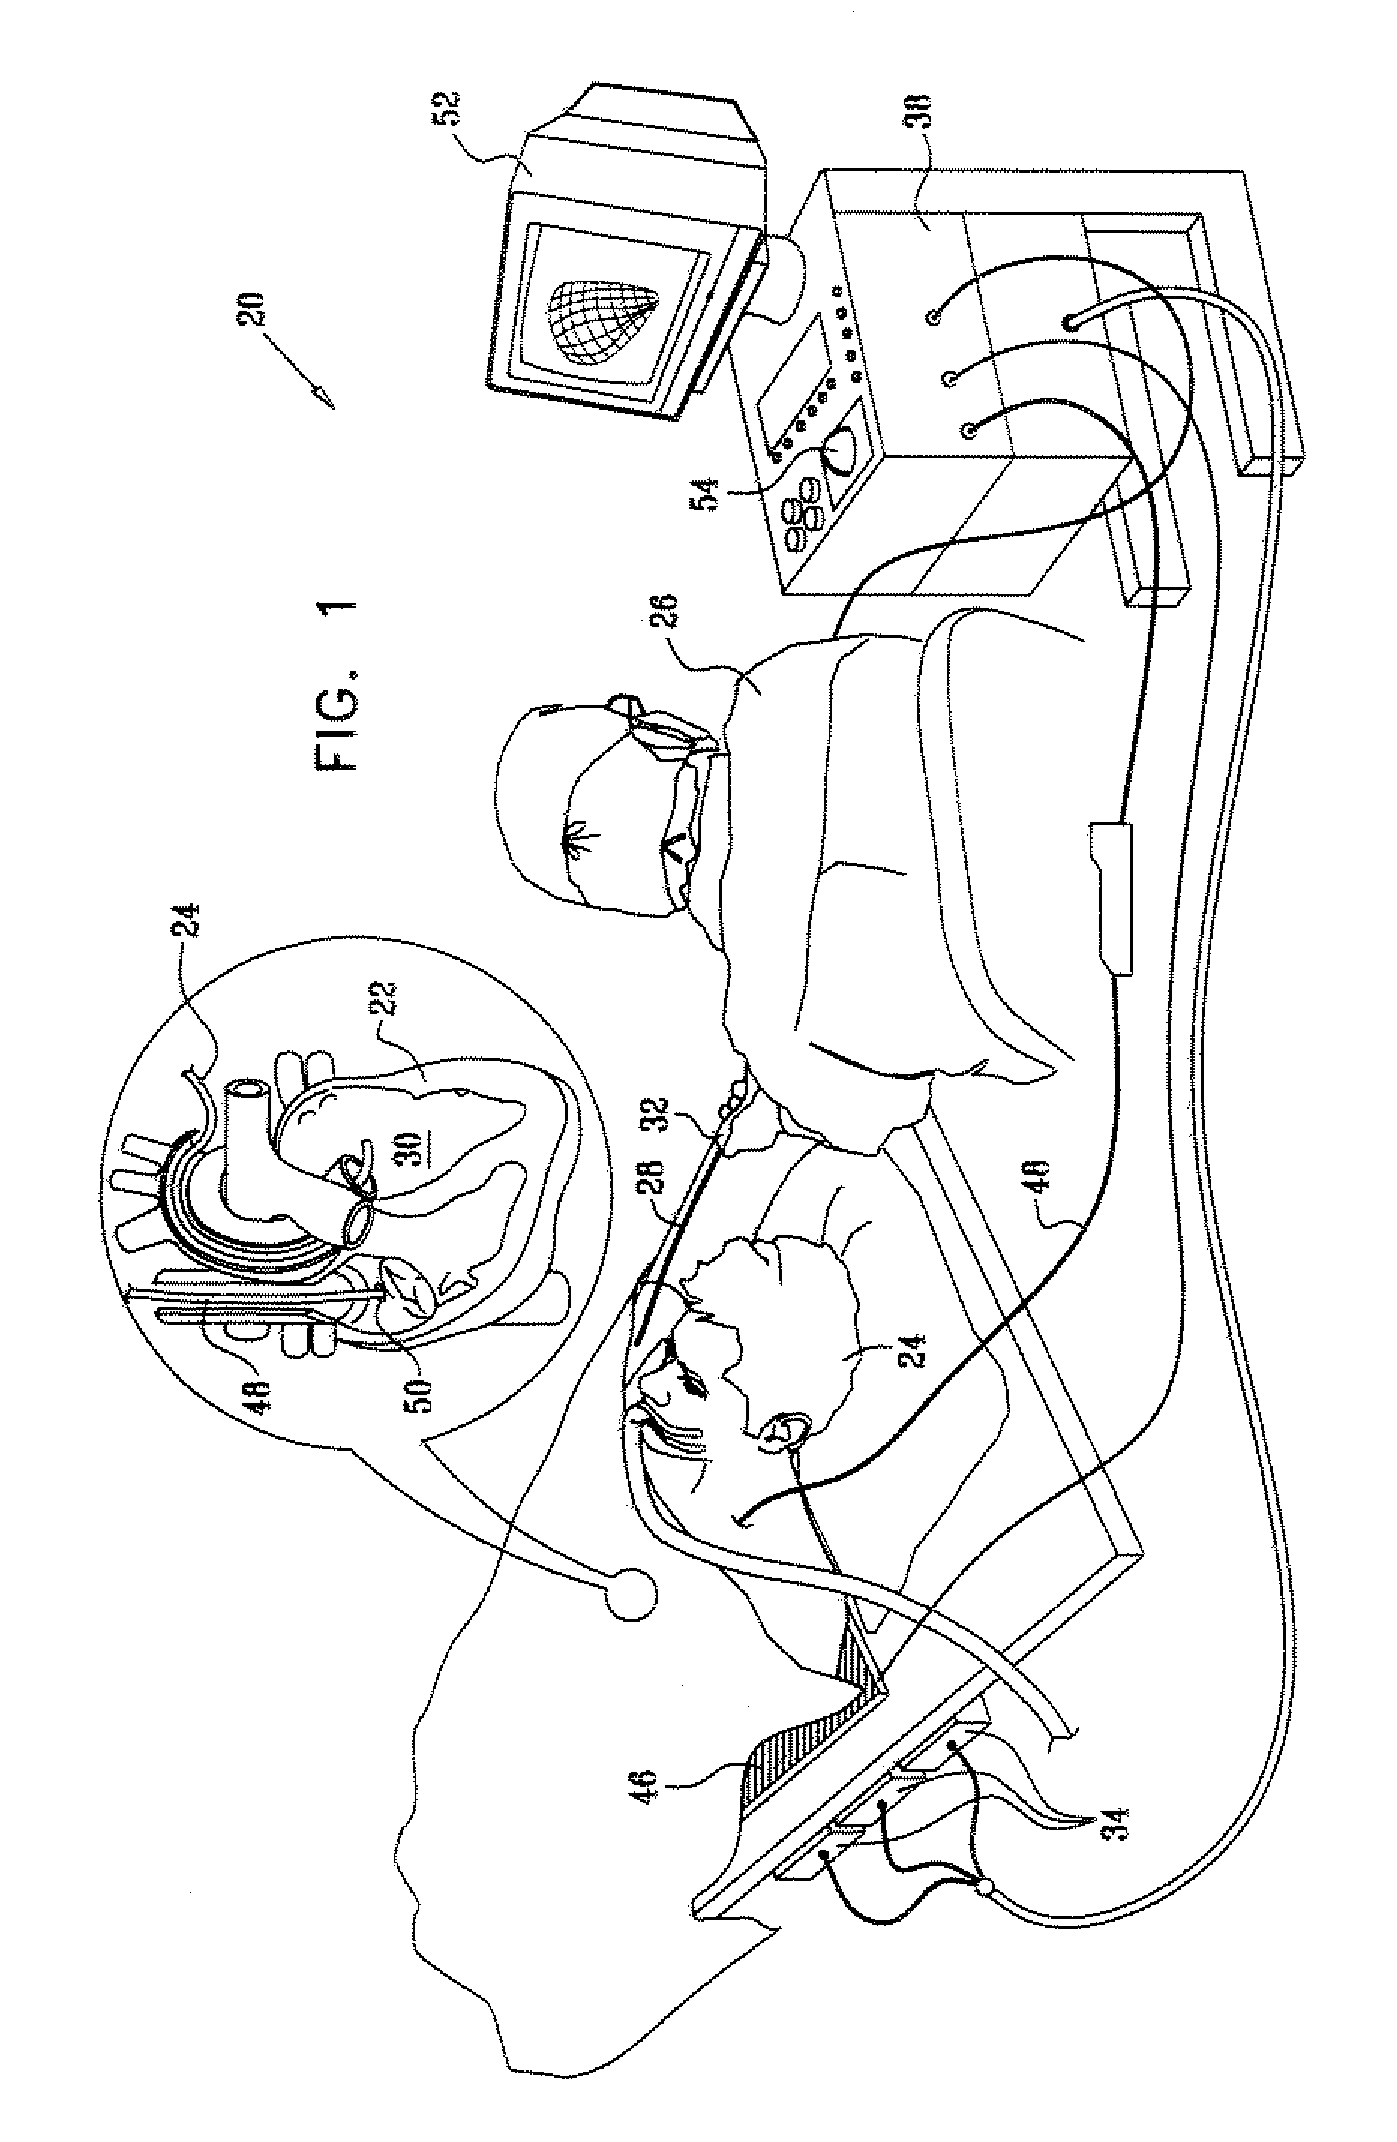 Intracorporeal location system with movement compensation